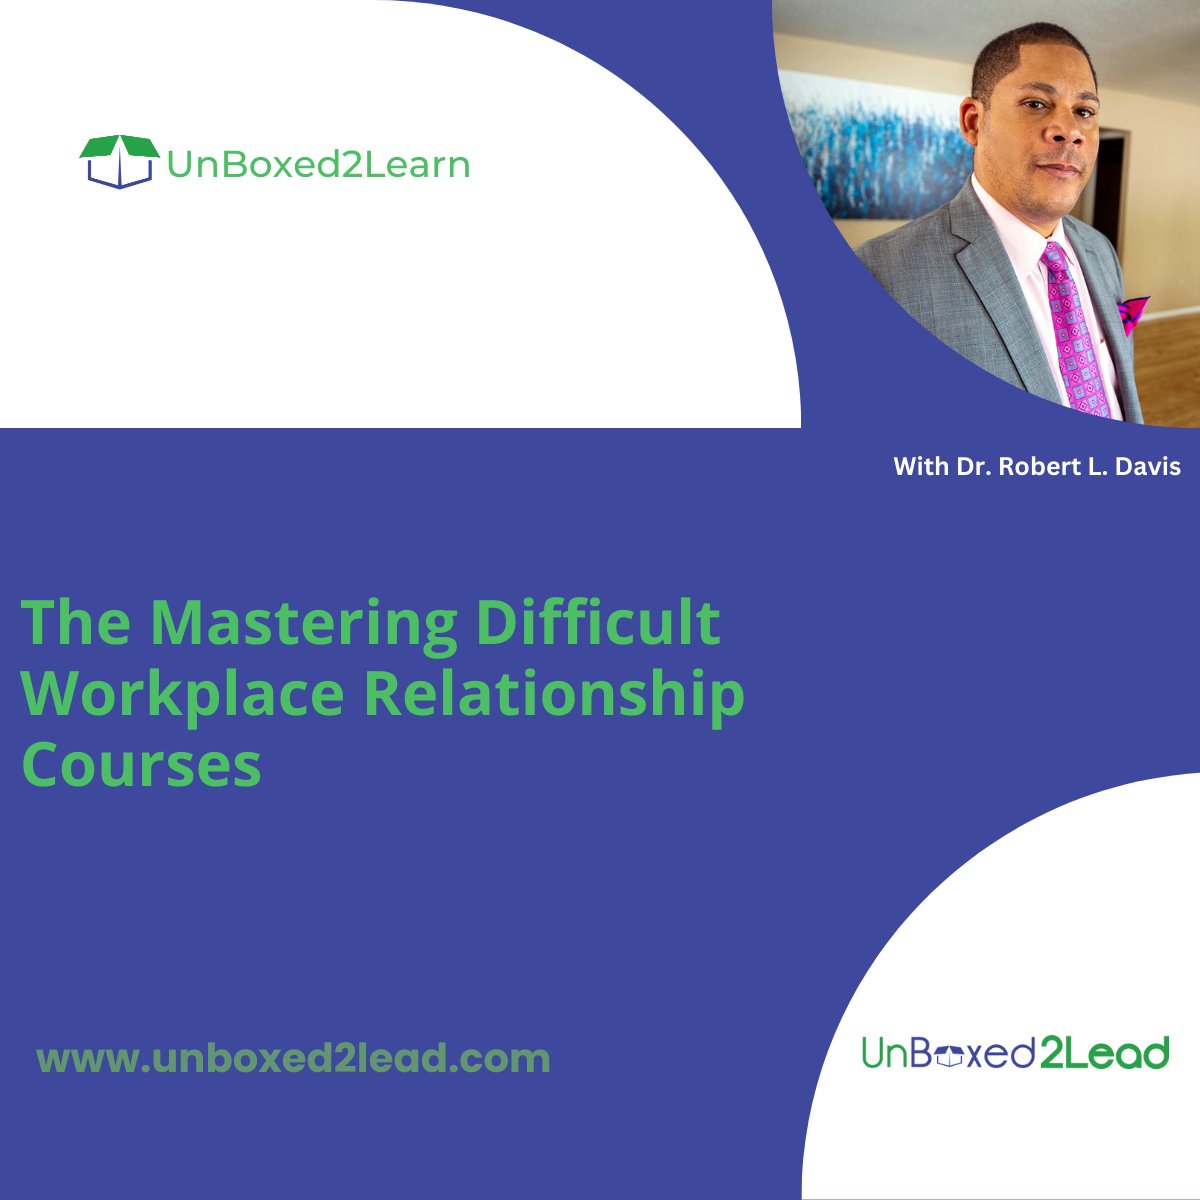 Feeling exhausted from challenging workplace relationships? Take the Mastering Difficult Workplace Relationships Courses.
Sign up TODAY: unboxed2lead.com/unboxed2learn

 #Unboxed2Lead#LeadershipSkills#WorkplaceRelationships#ConflictResolution#EmotionalMaturity #ProfessionalDevelopment